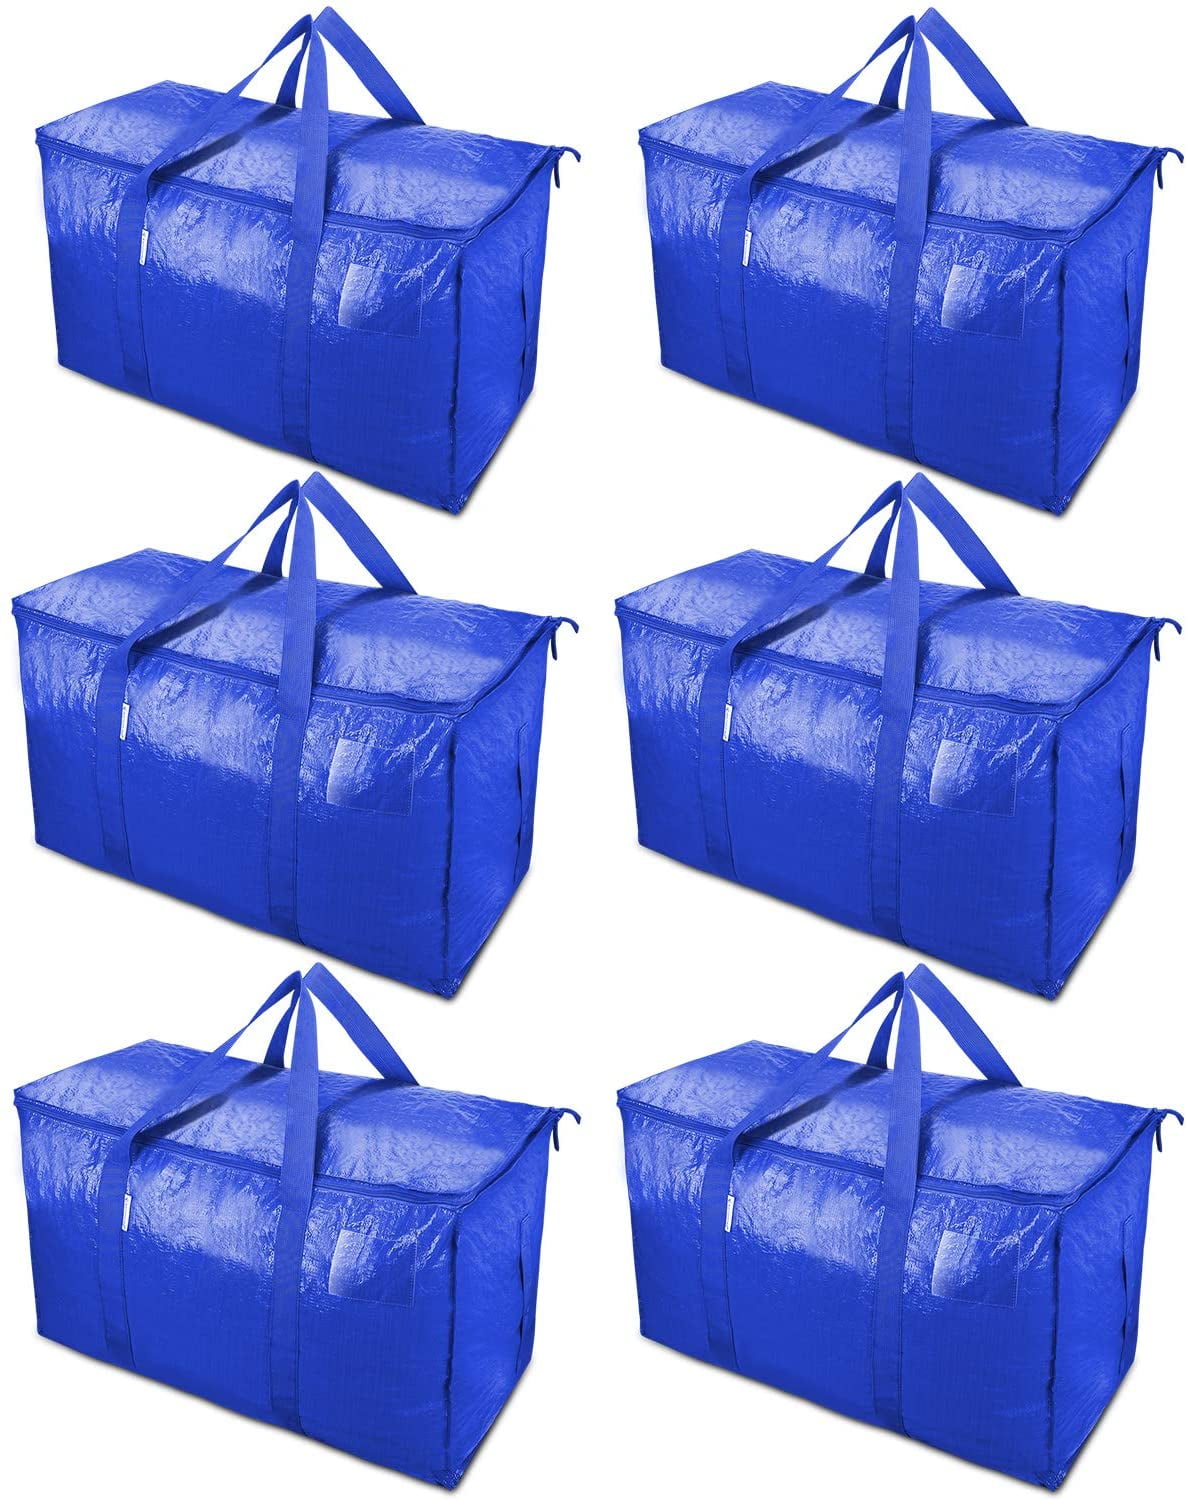 BAG-THAT! 5 Moving Bags Heavy Duty Extra Large Stronger Handles Wrap Totes  Storage Boxes Storage